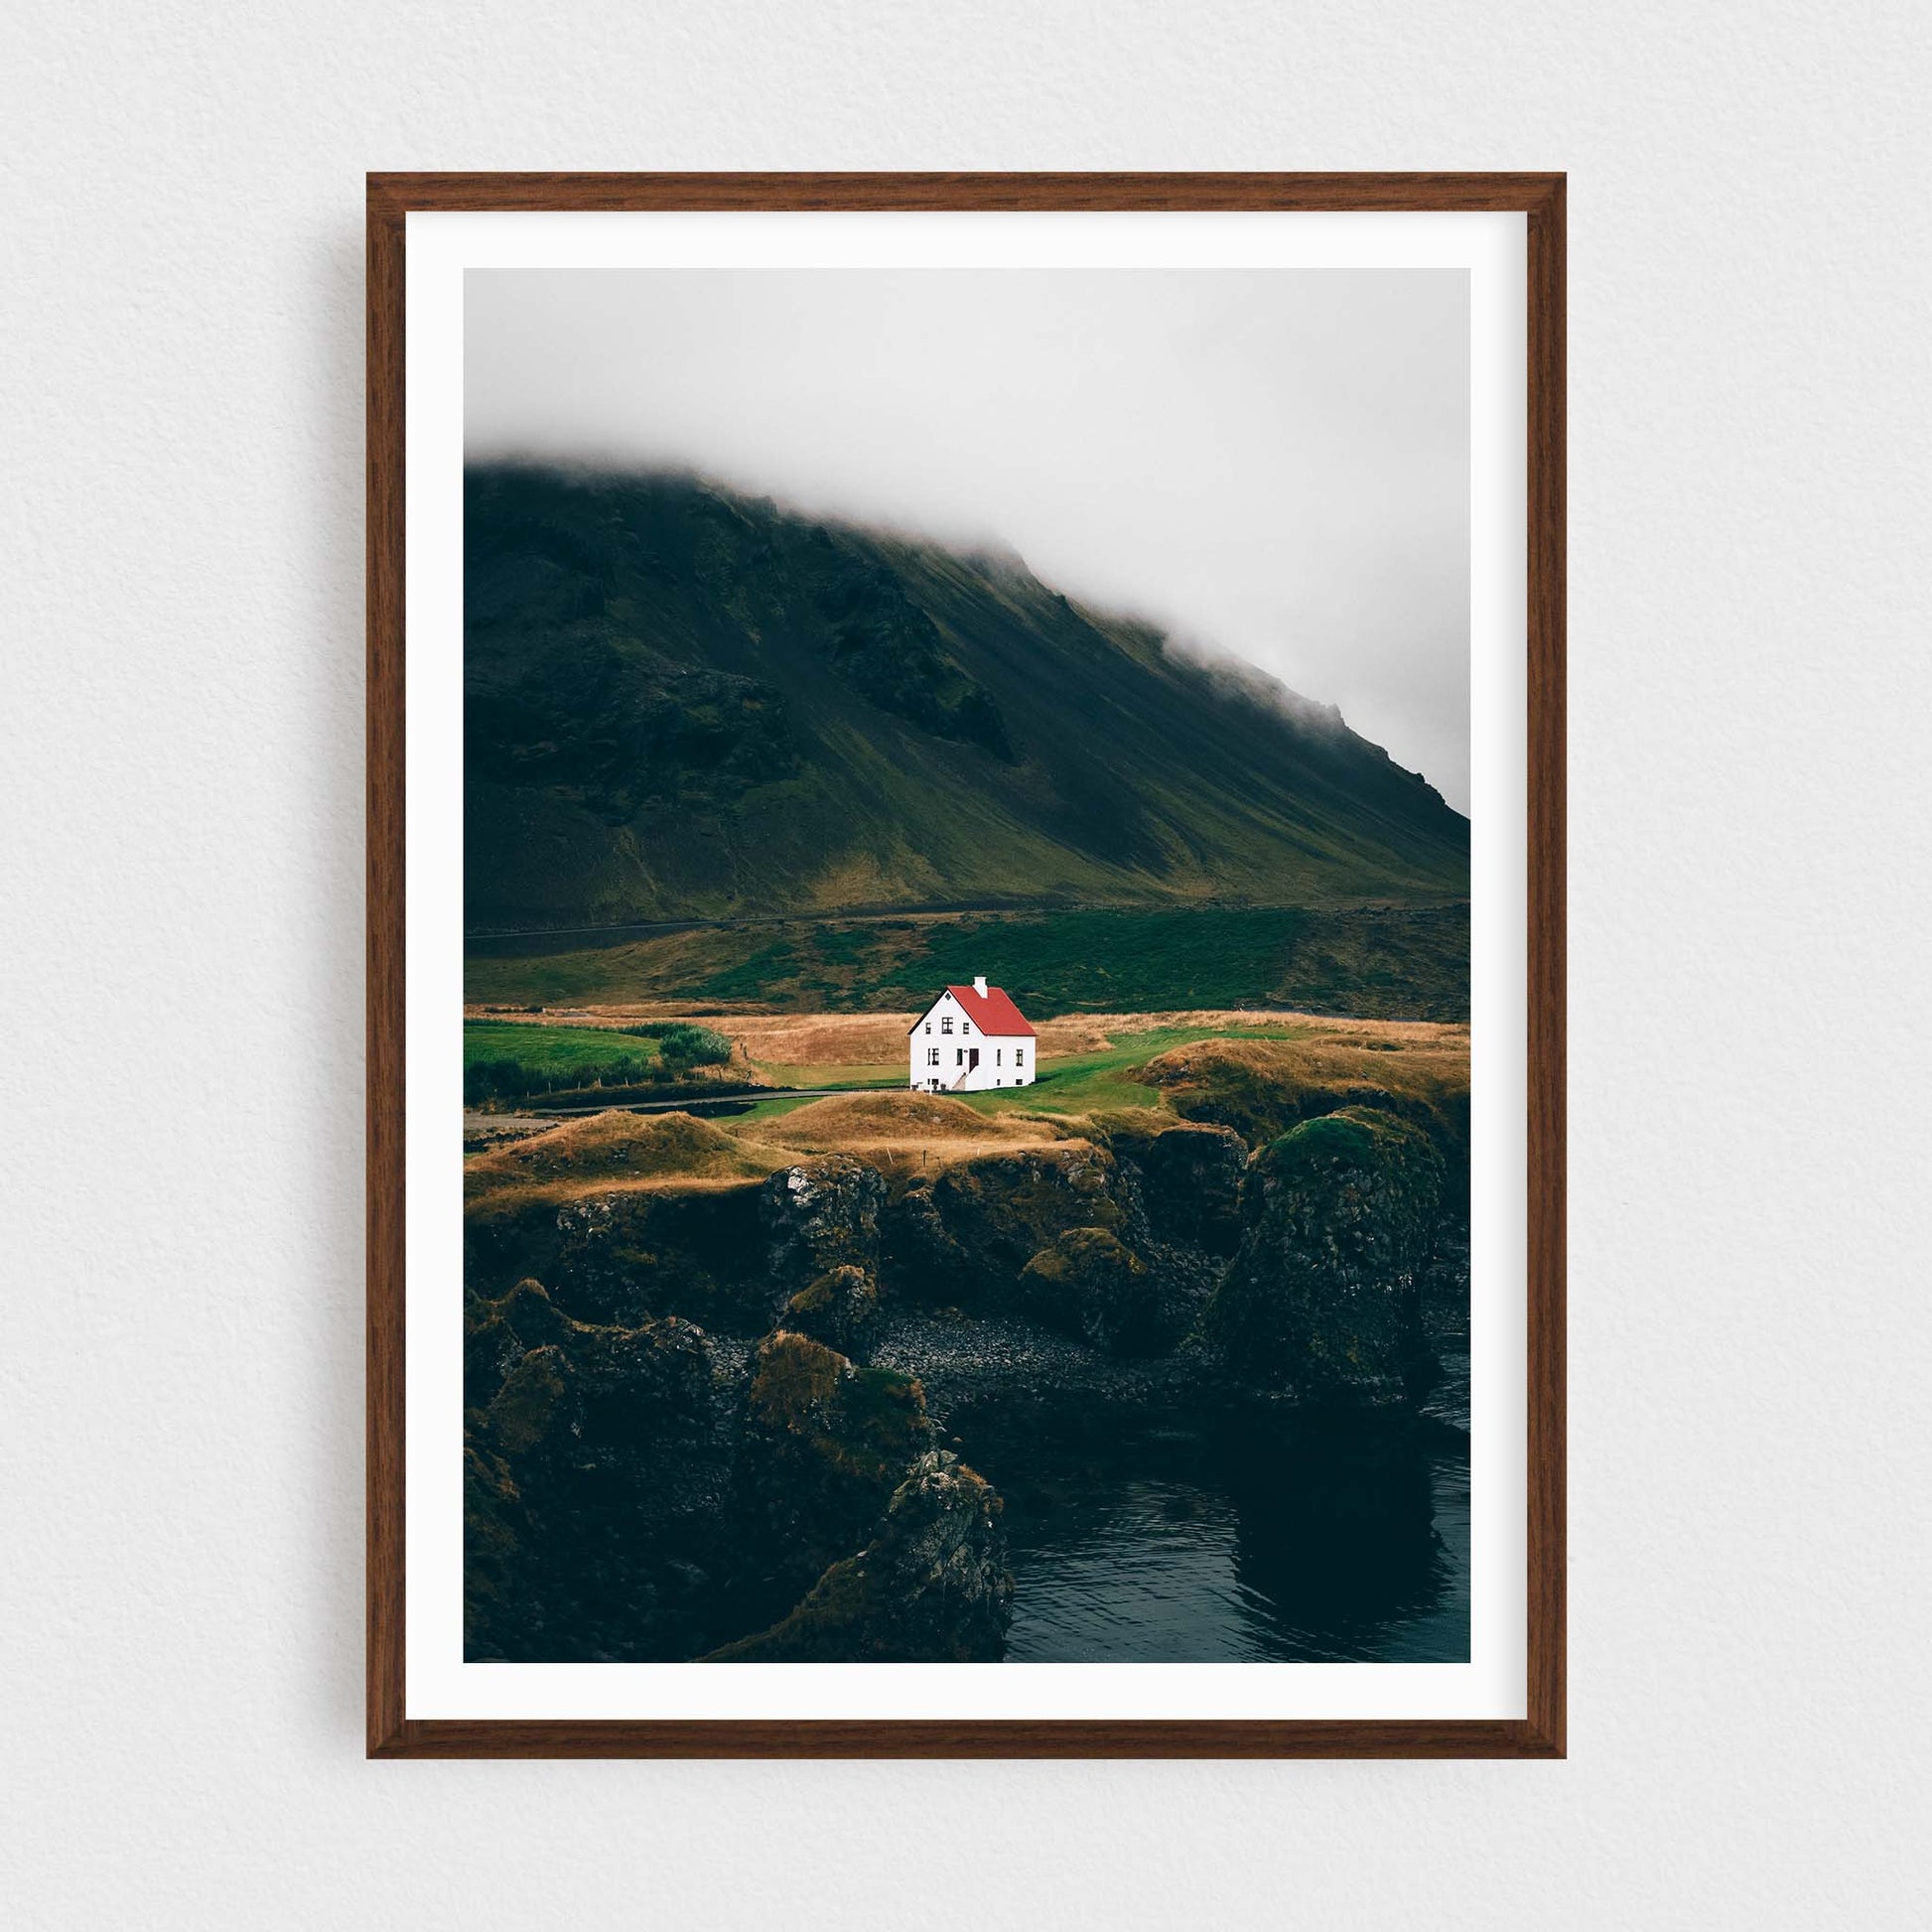 Iceland fine art photography print featuring Arnarstapi lonely house, in a walnut frame